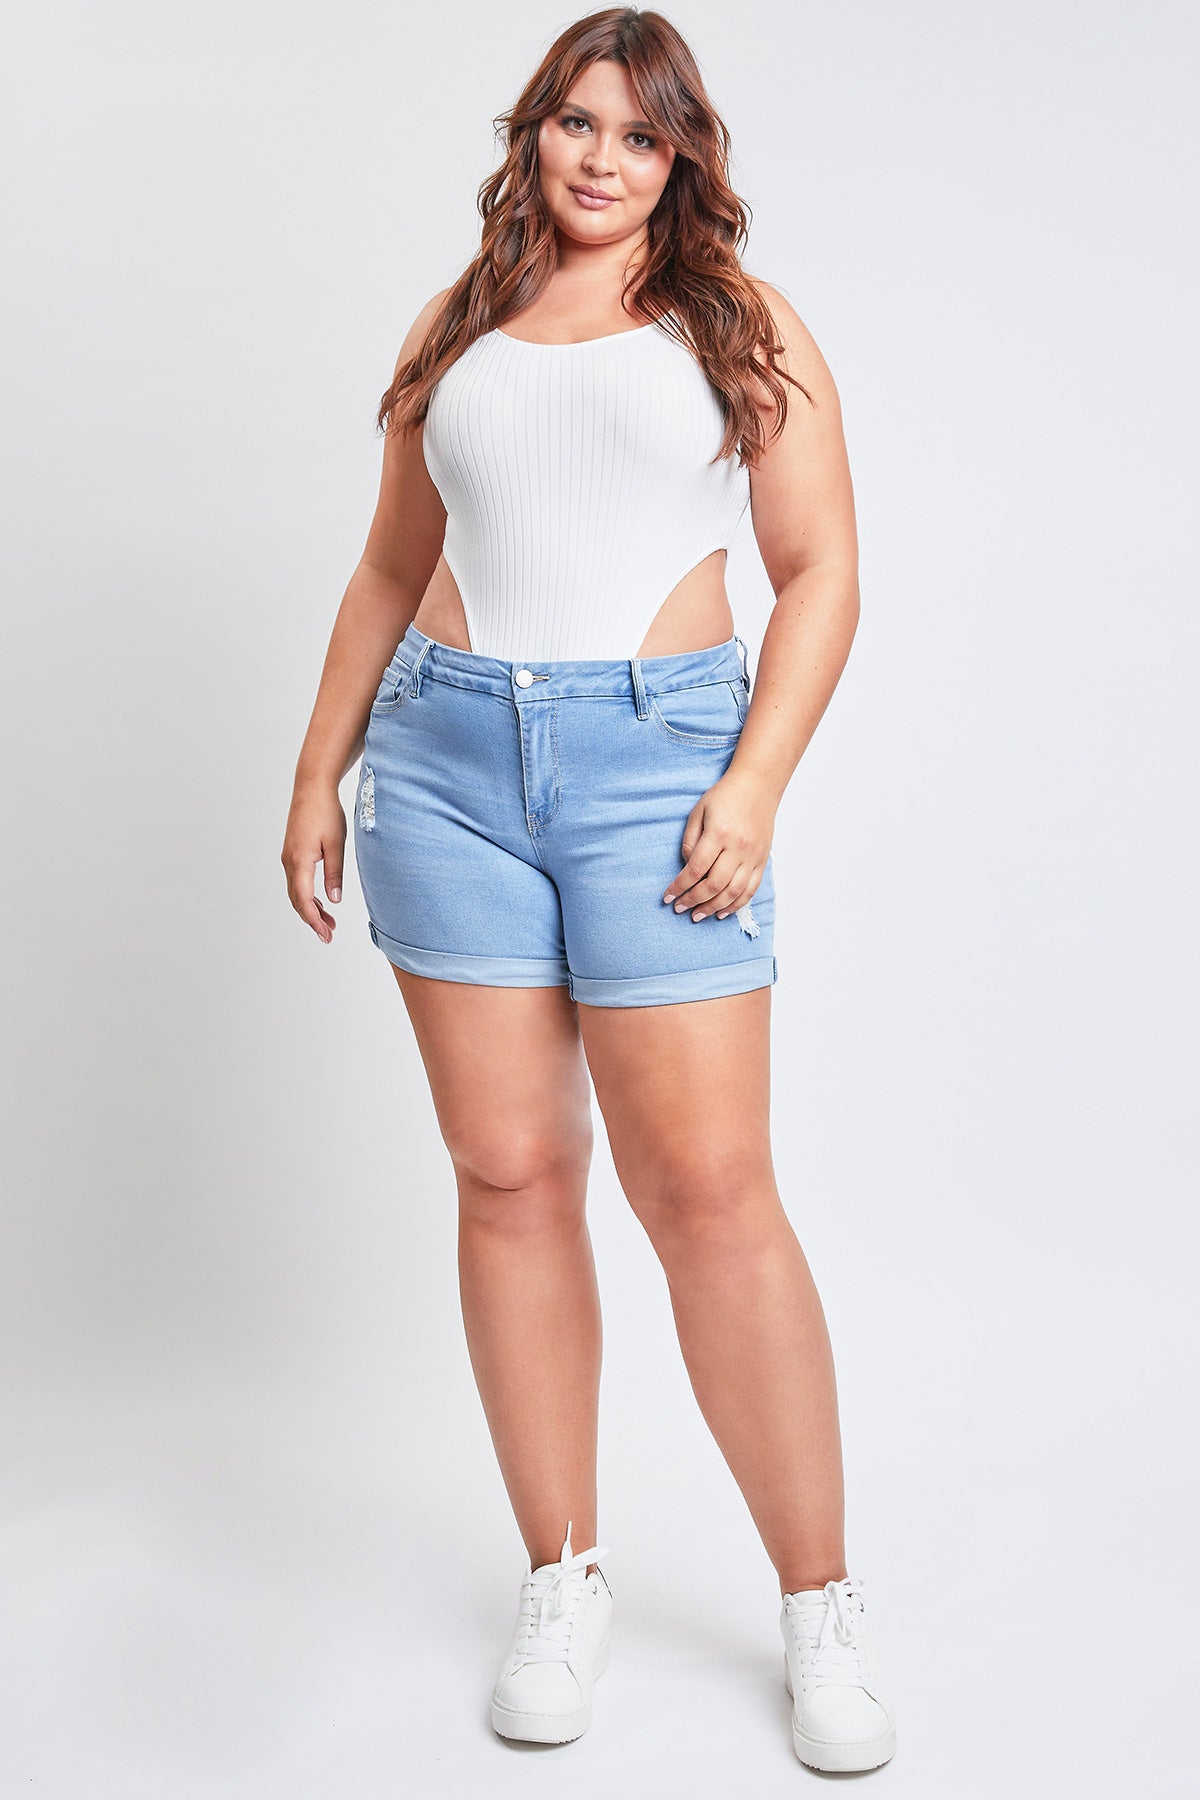 Women's Plus Size Curvy Fit High Rise Cuffed Shorts from ROYALTY